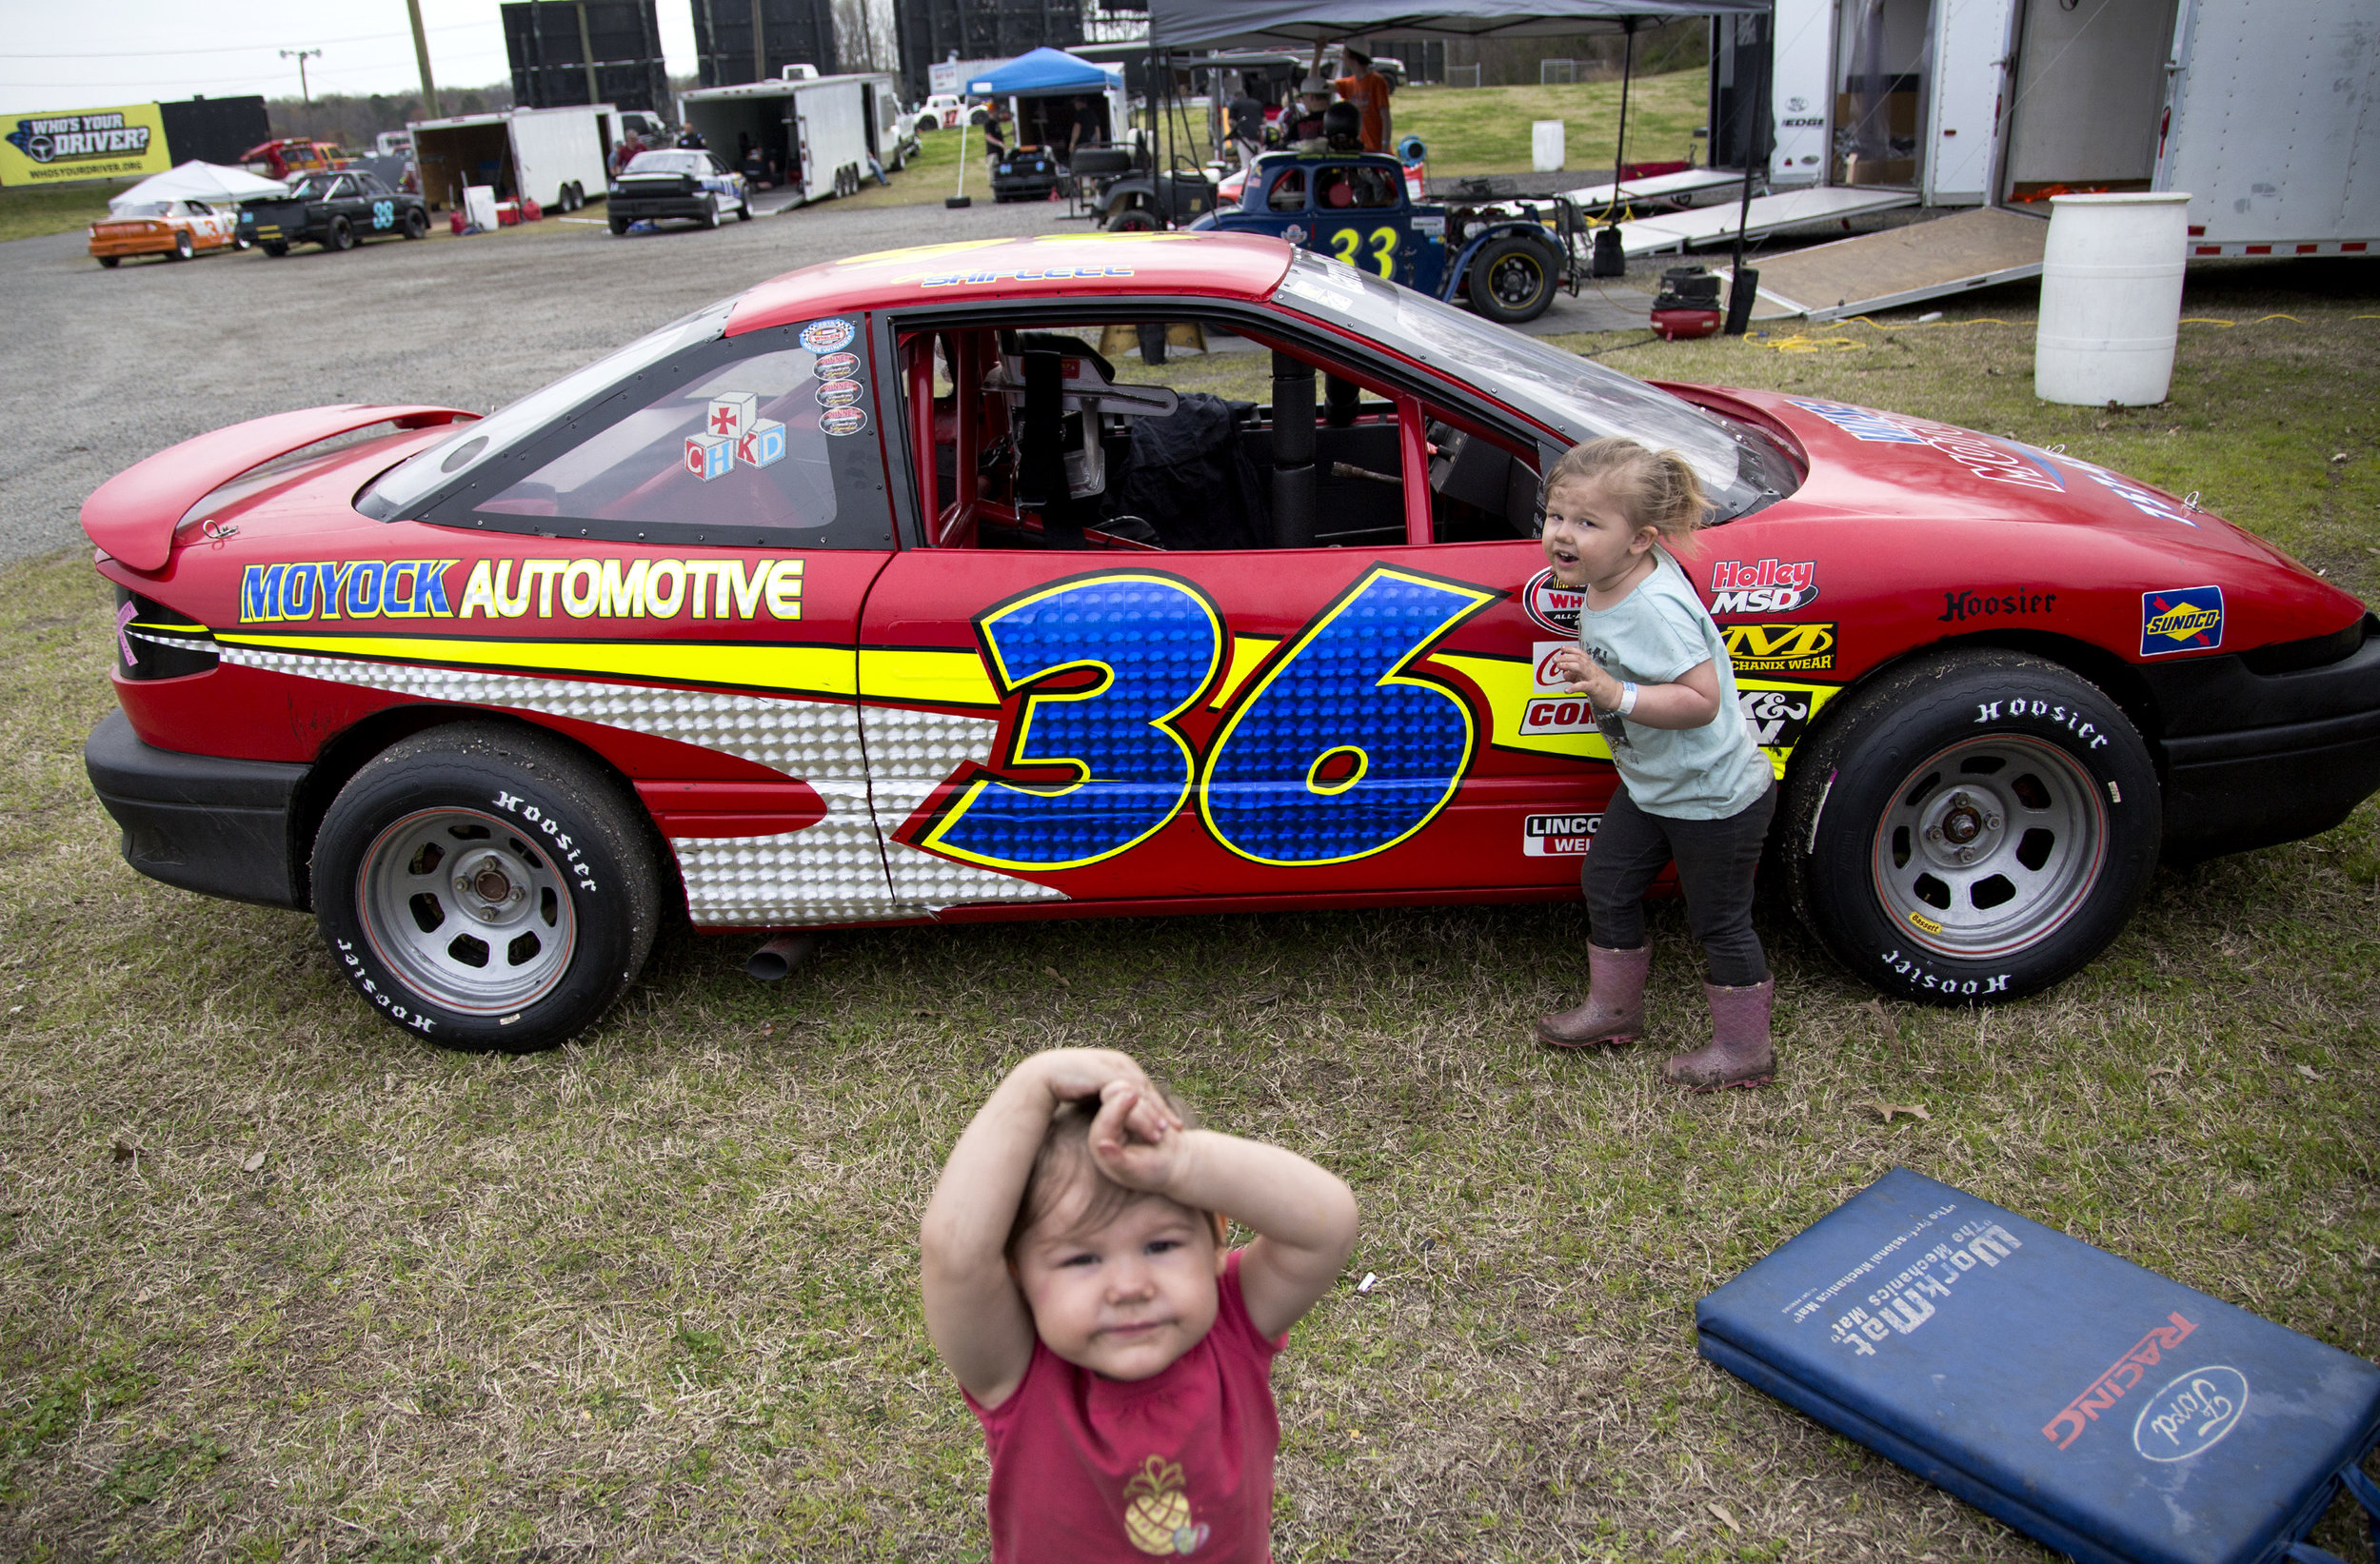  Sisters Kinsley, 2, and Adalynn Waters, 3, play in front of their mom's Ucar before the opening night races at Langley Speedway in Newport News, VA, on March 30, 2019. 